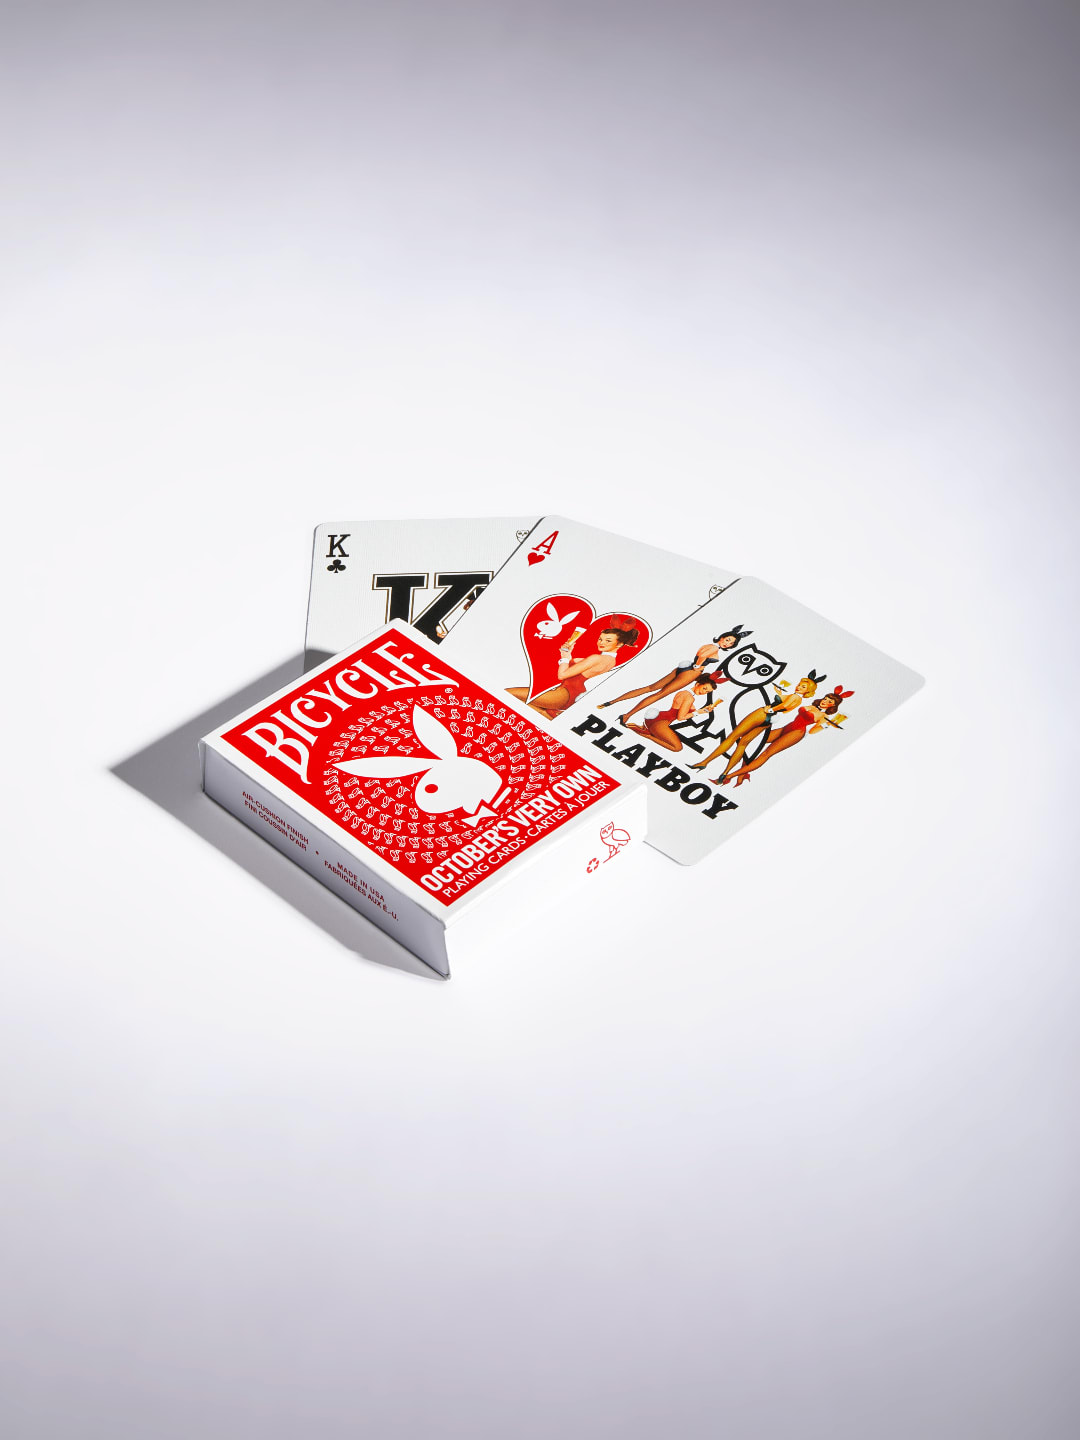 Playing cards from the Playboy x OVO capsule.